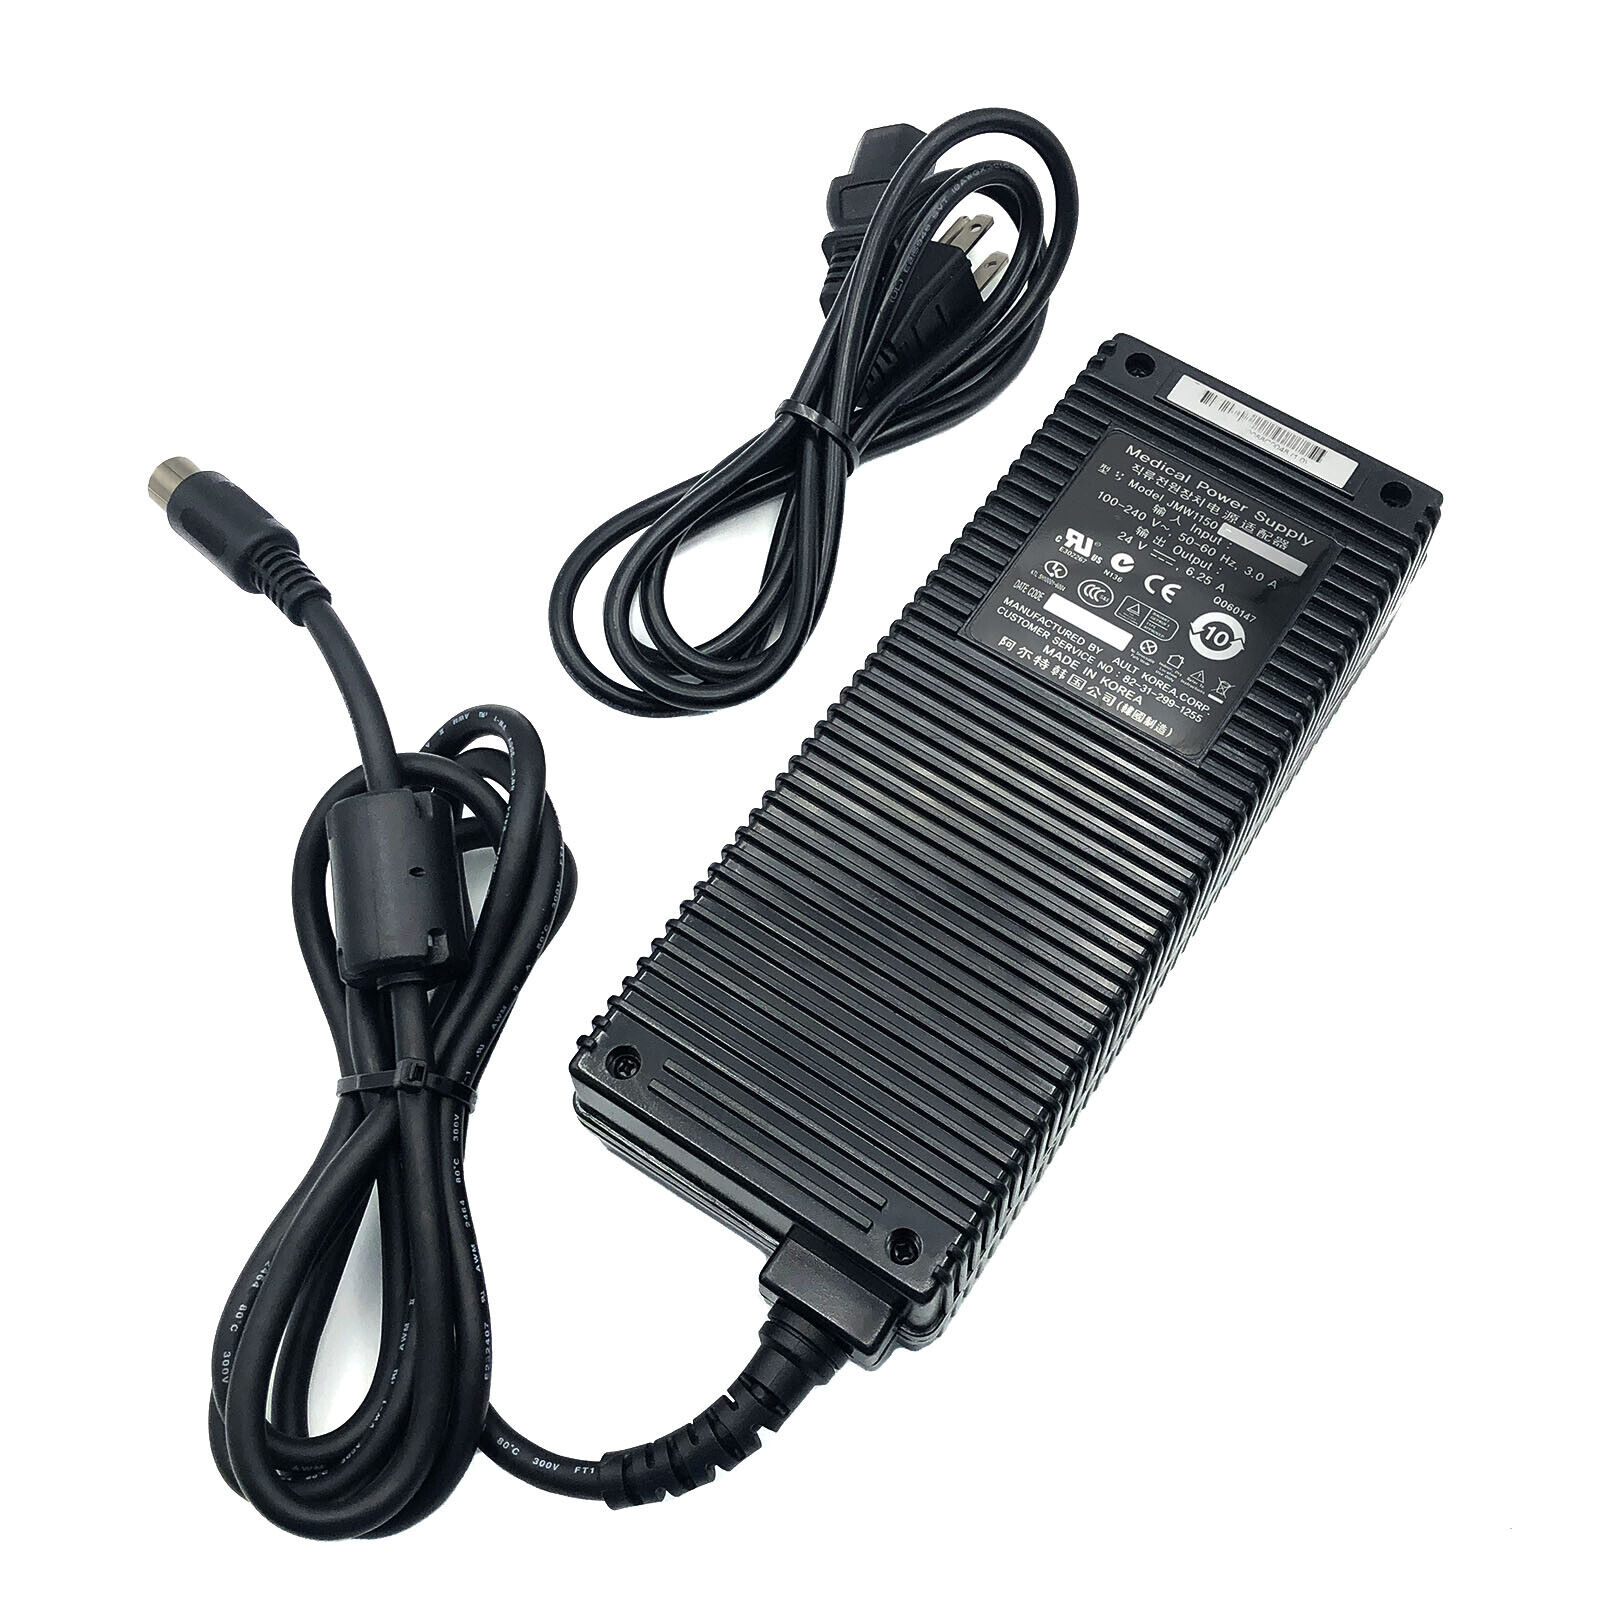 *Brand NEW*Ault 24V 6.25A AC Adapter Medical Power Supply JMW1150 6-Pin w/Cord - Click Image to Close